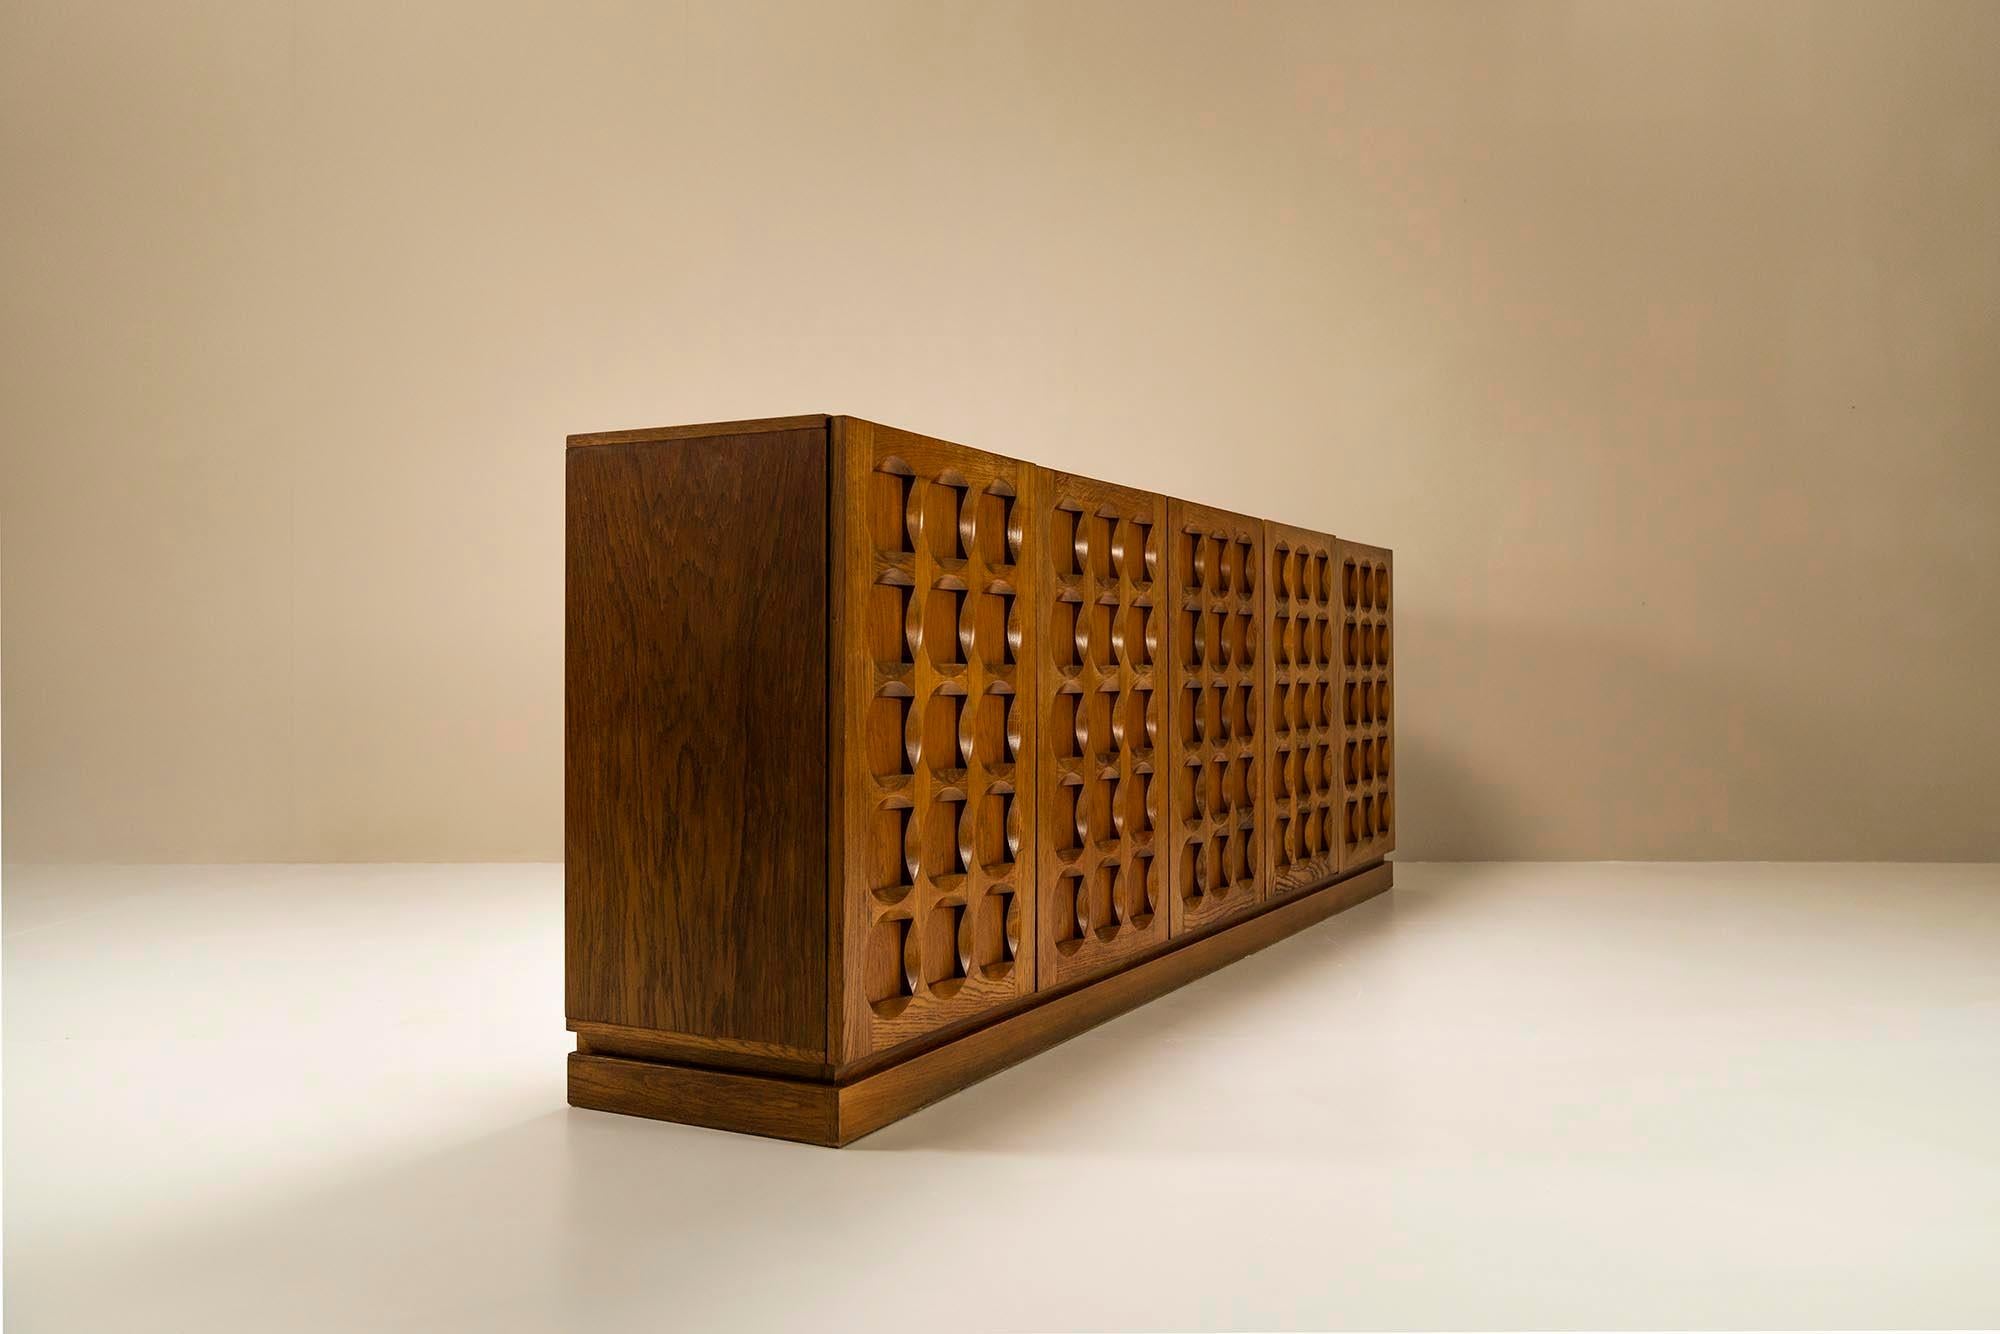 This sideboard was designed and manufactured in the early 1970s by the Belgian furniture company Defour. Typical for the Belgian design from that period is the brutalist style that is so recognizable and much loved up until today. The hypnotic